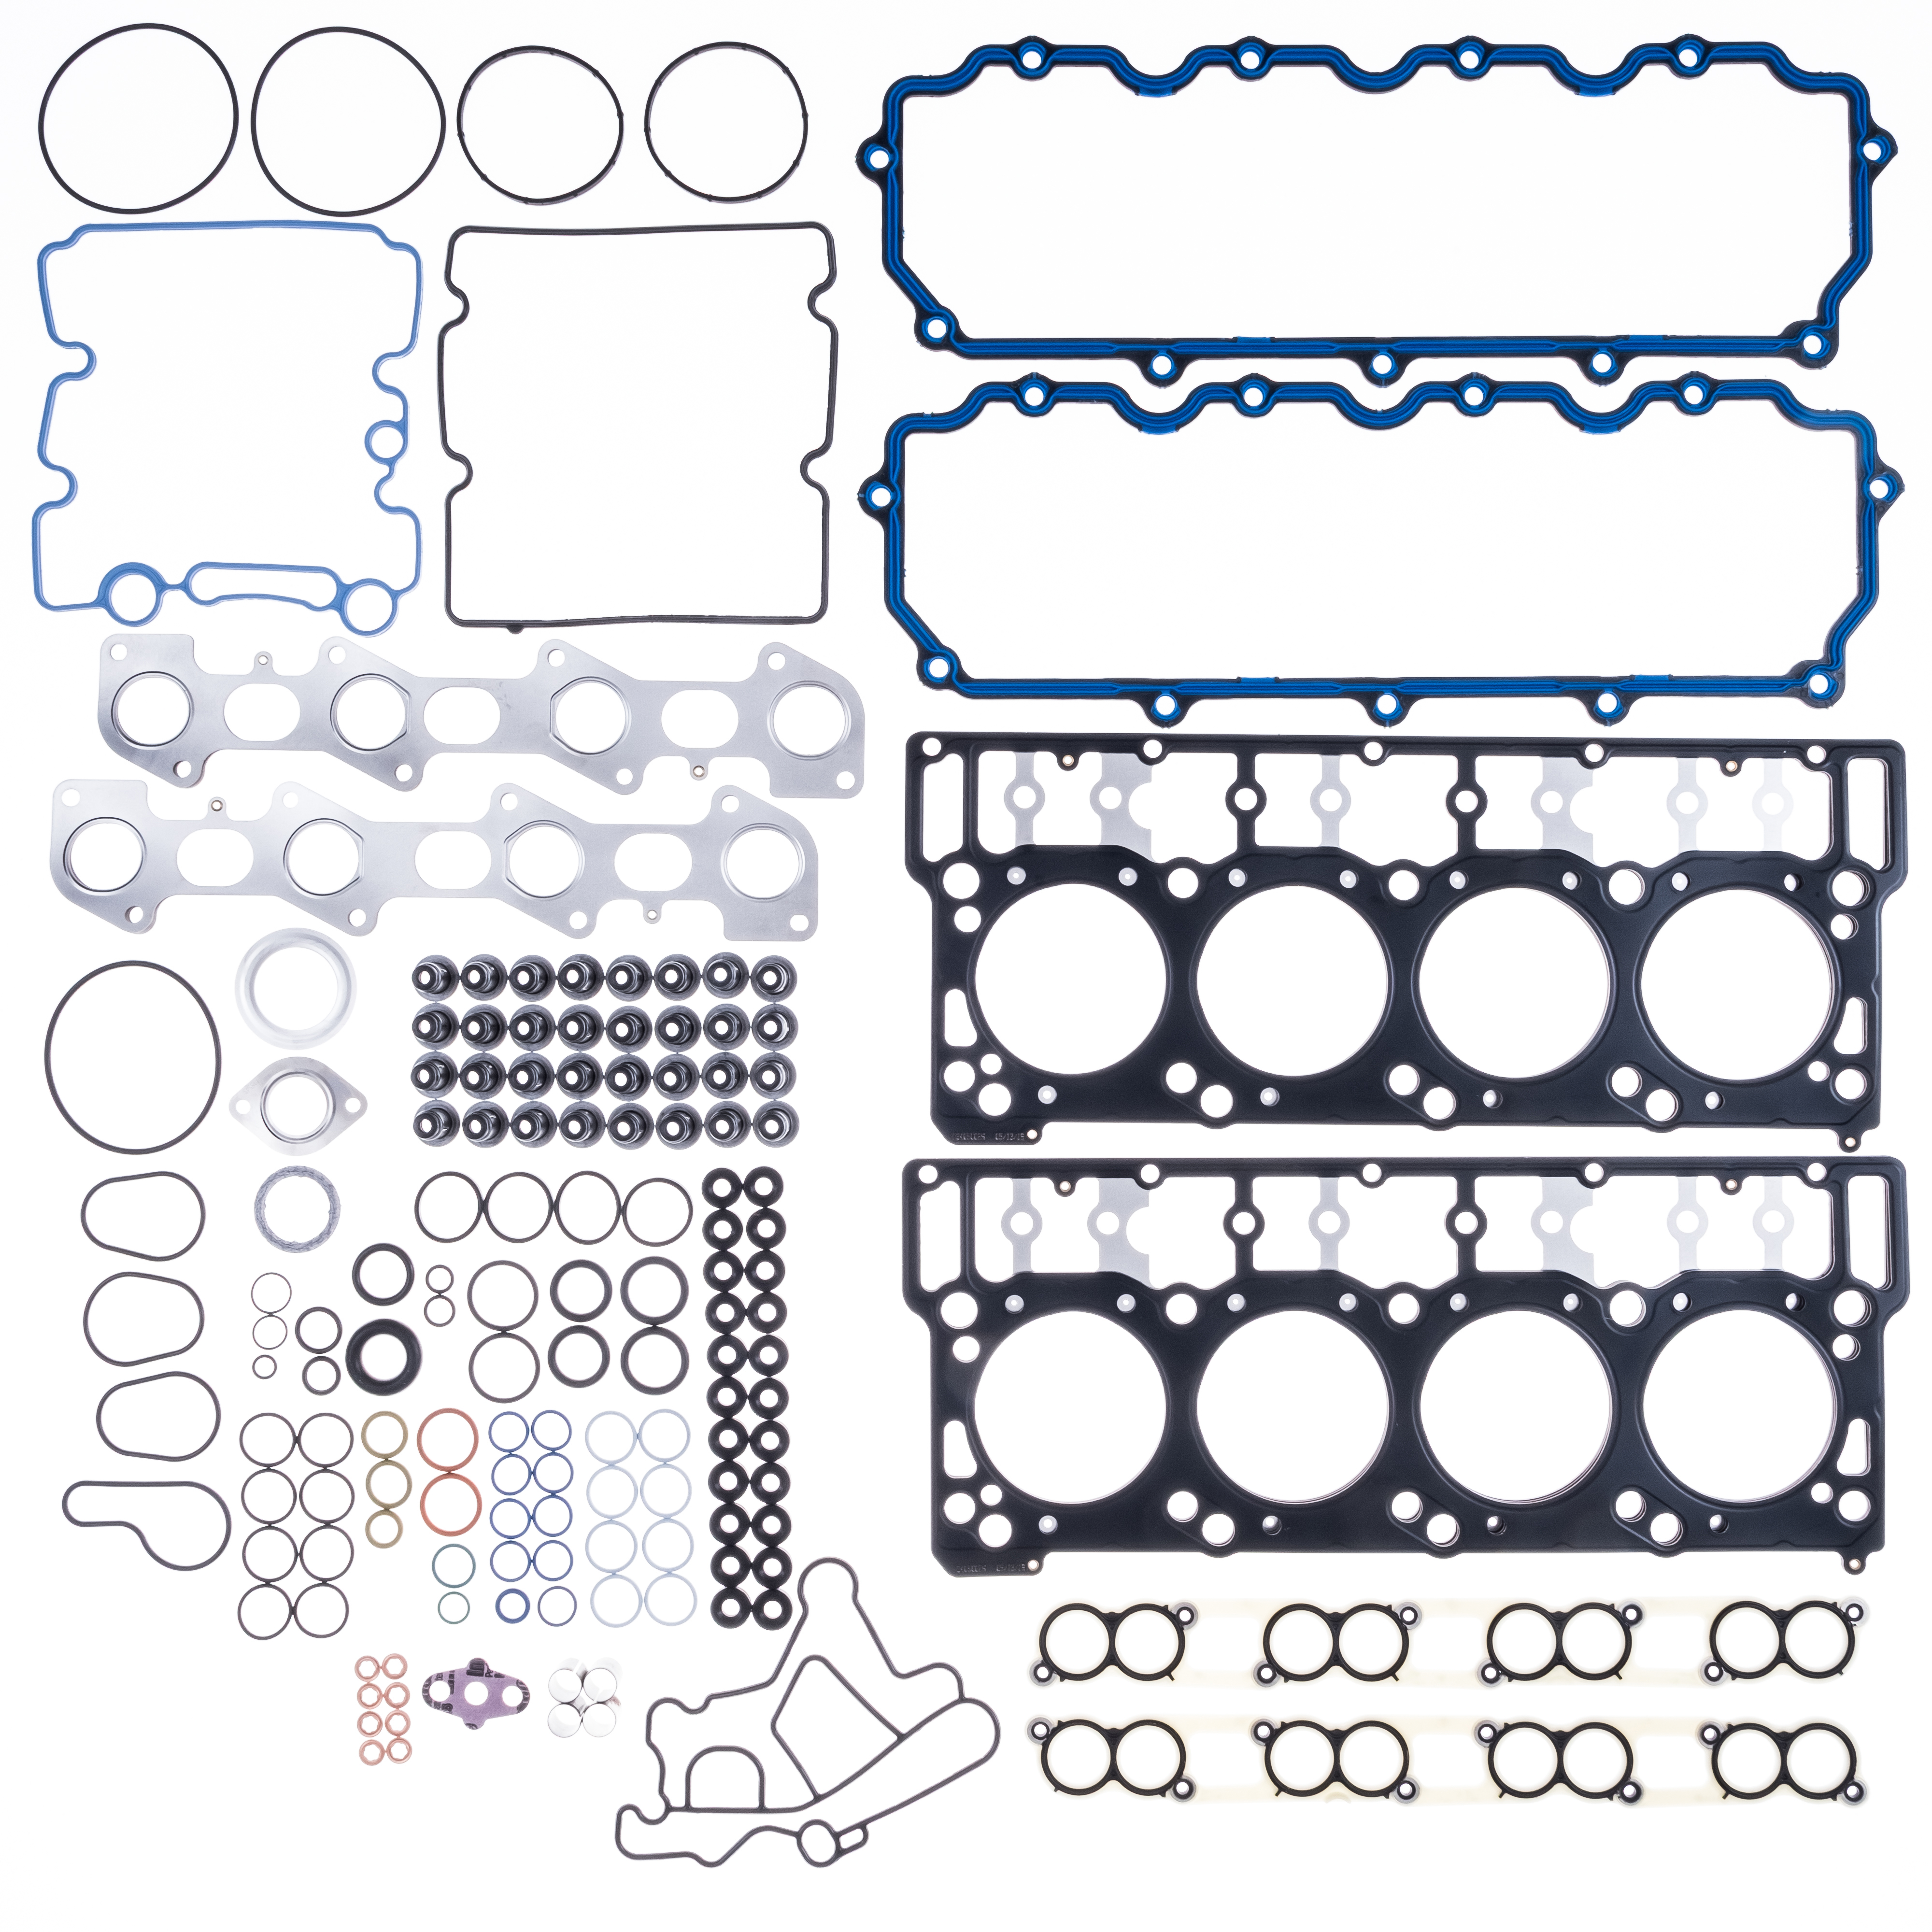 Cometic Gasket Automotive Pro3005t Top End Gasket Kit Fits select: 2004-2006 FORD F250, 2003-2006 FORD F350 - image 5 of 5